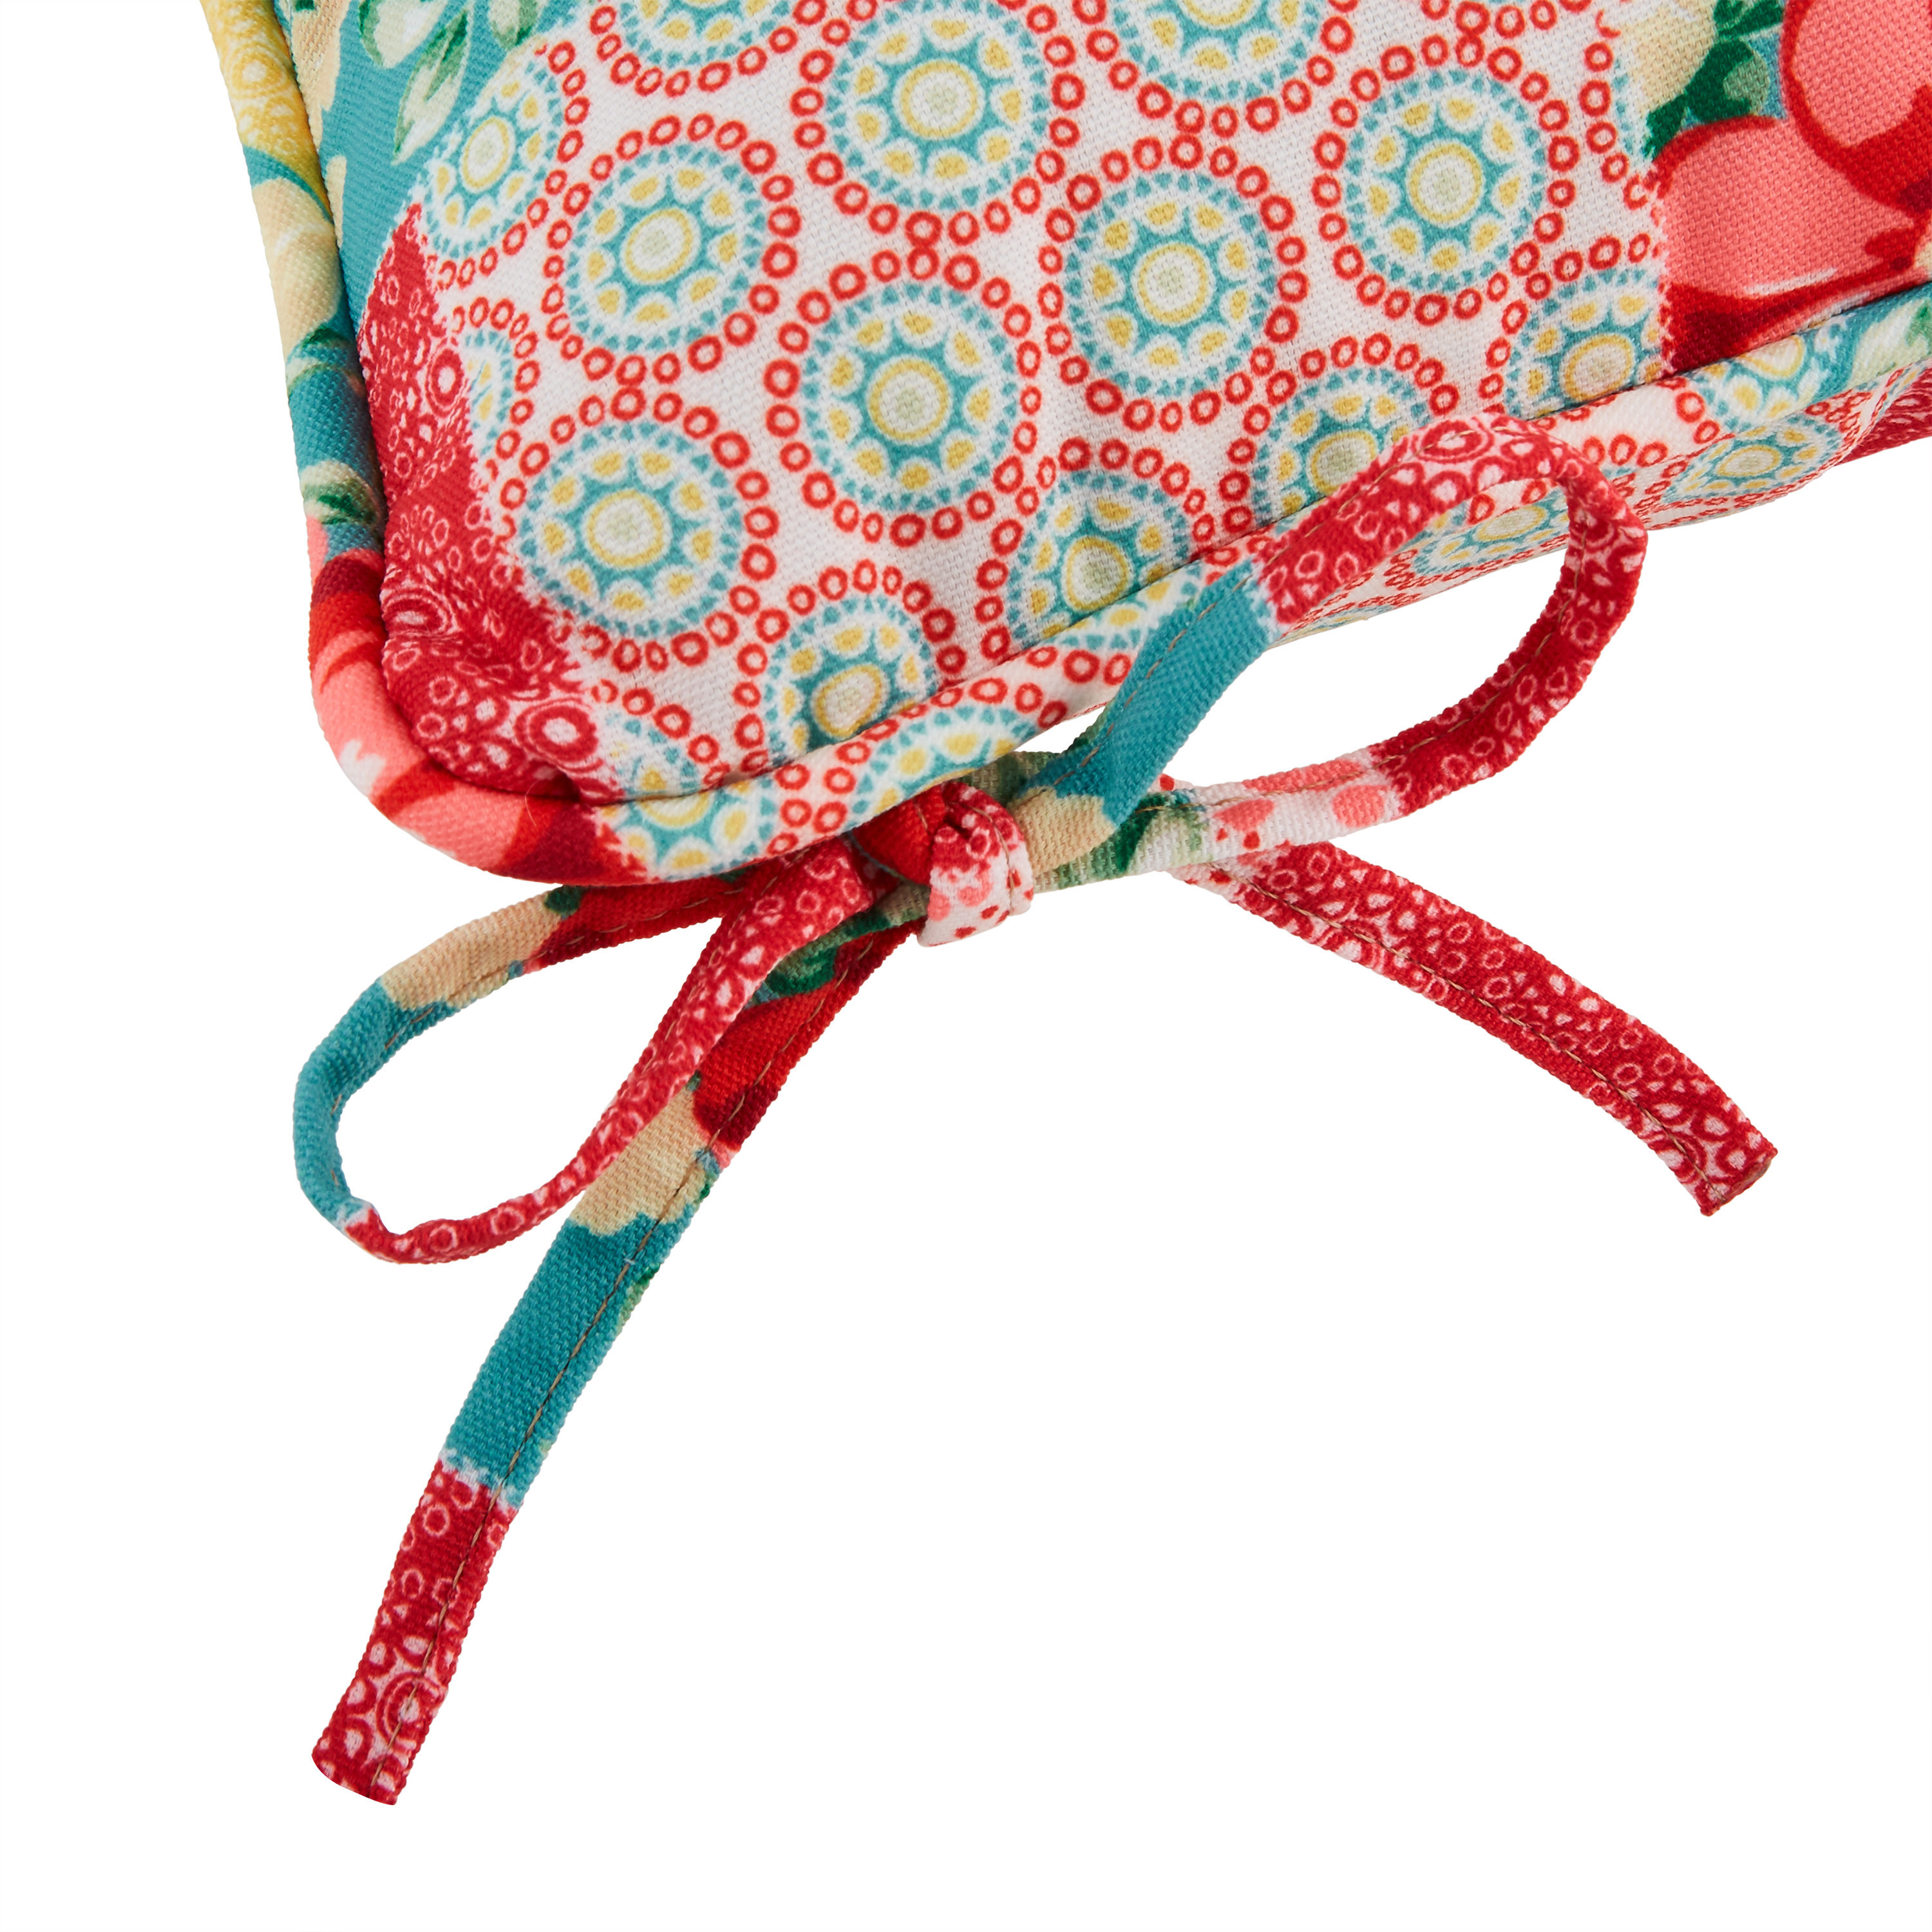 The Pioneer Woman 18" x 19" Multi-color Floral Patchwork Outdoor Seat Pad, 2 Pack - image 3 of 8